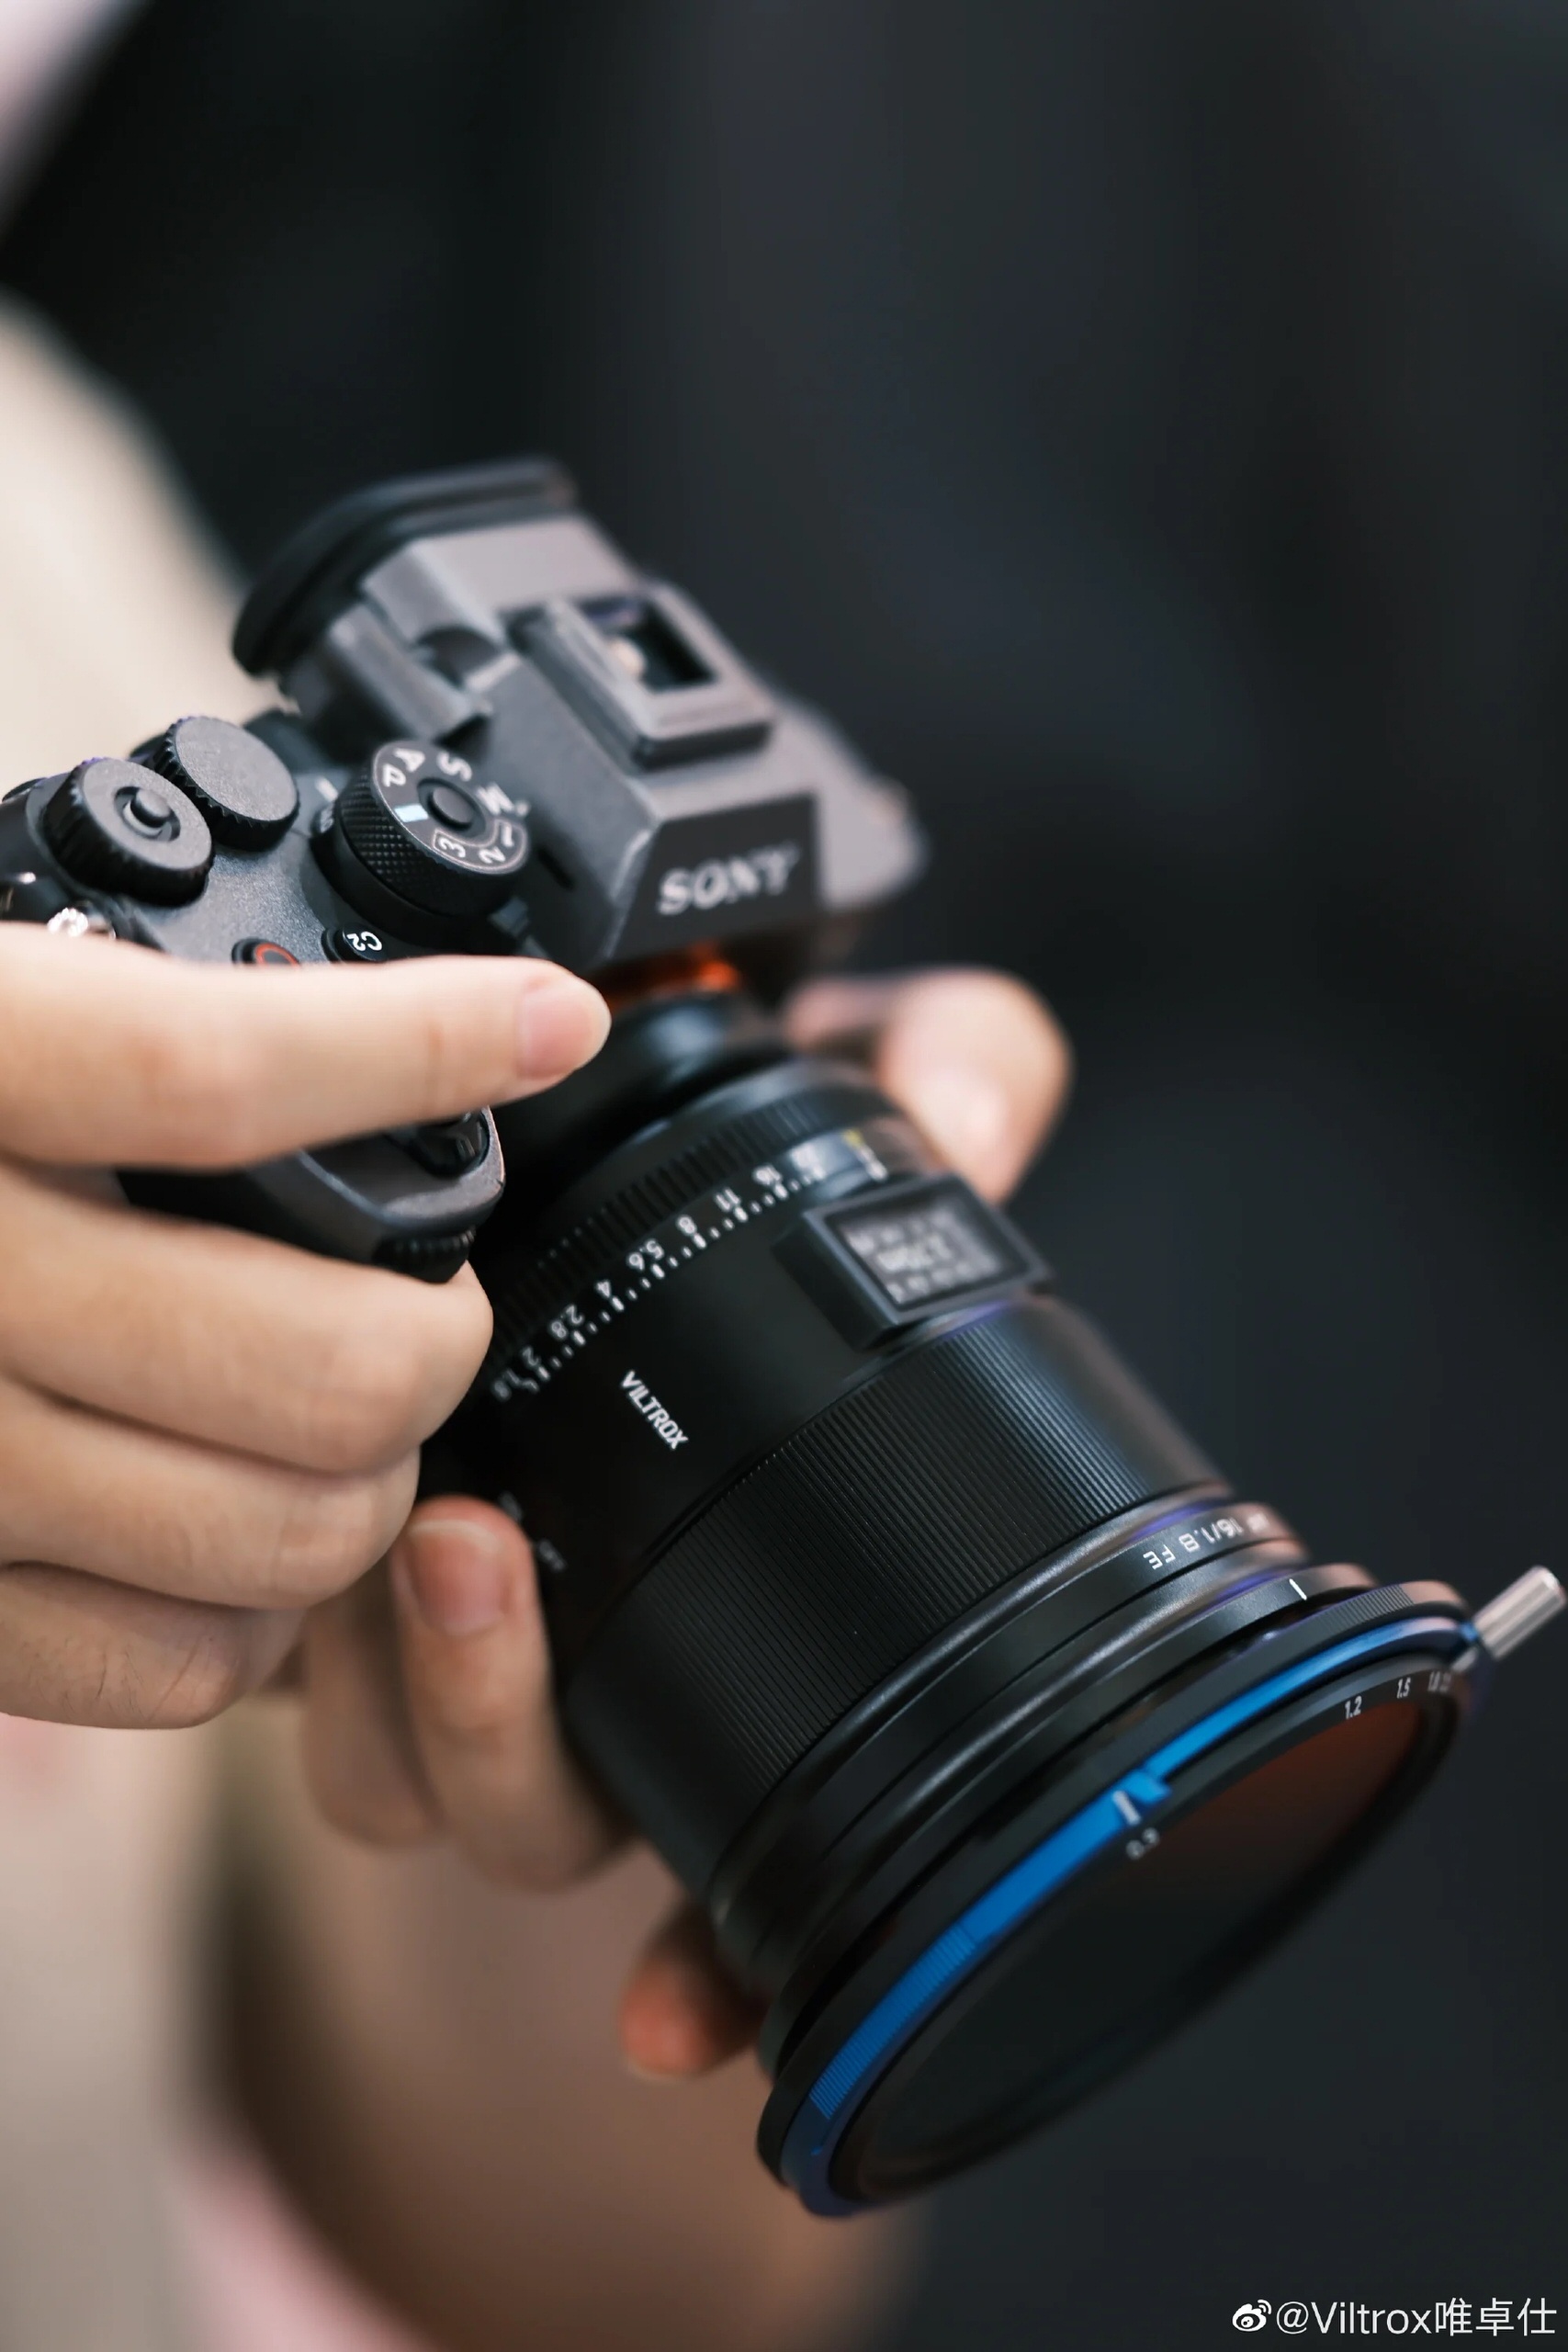 Viltrox Announces a 16mm f/1.8 Sony Lens with LCD Screen - Exibart Street